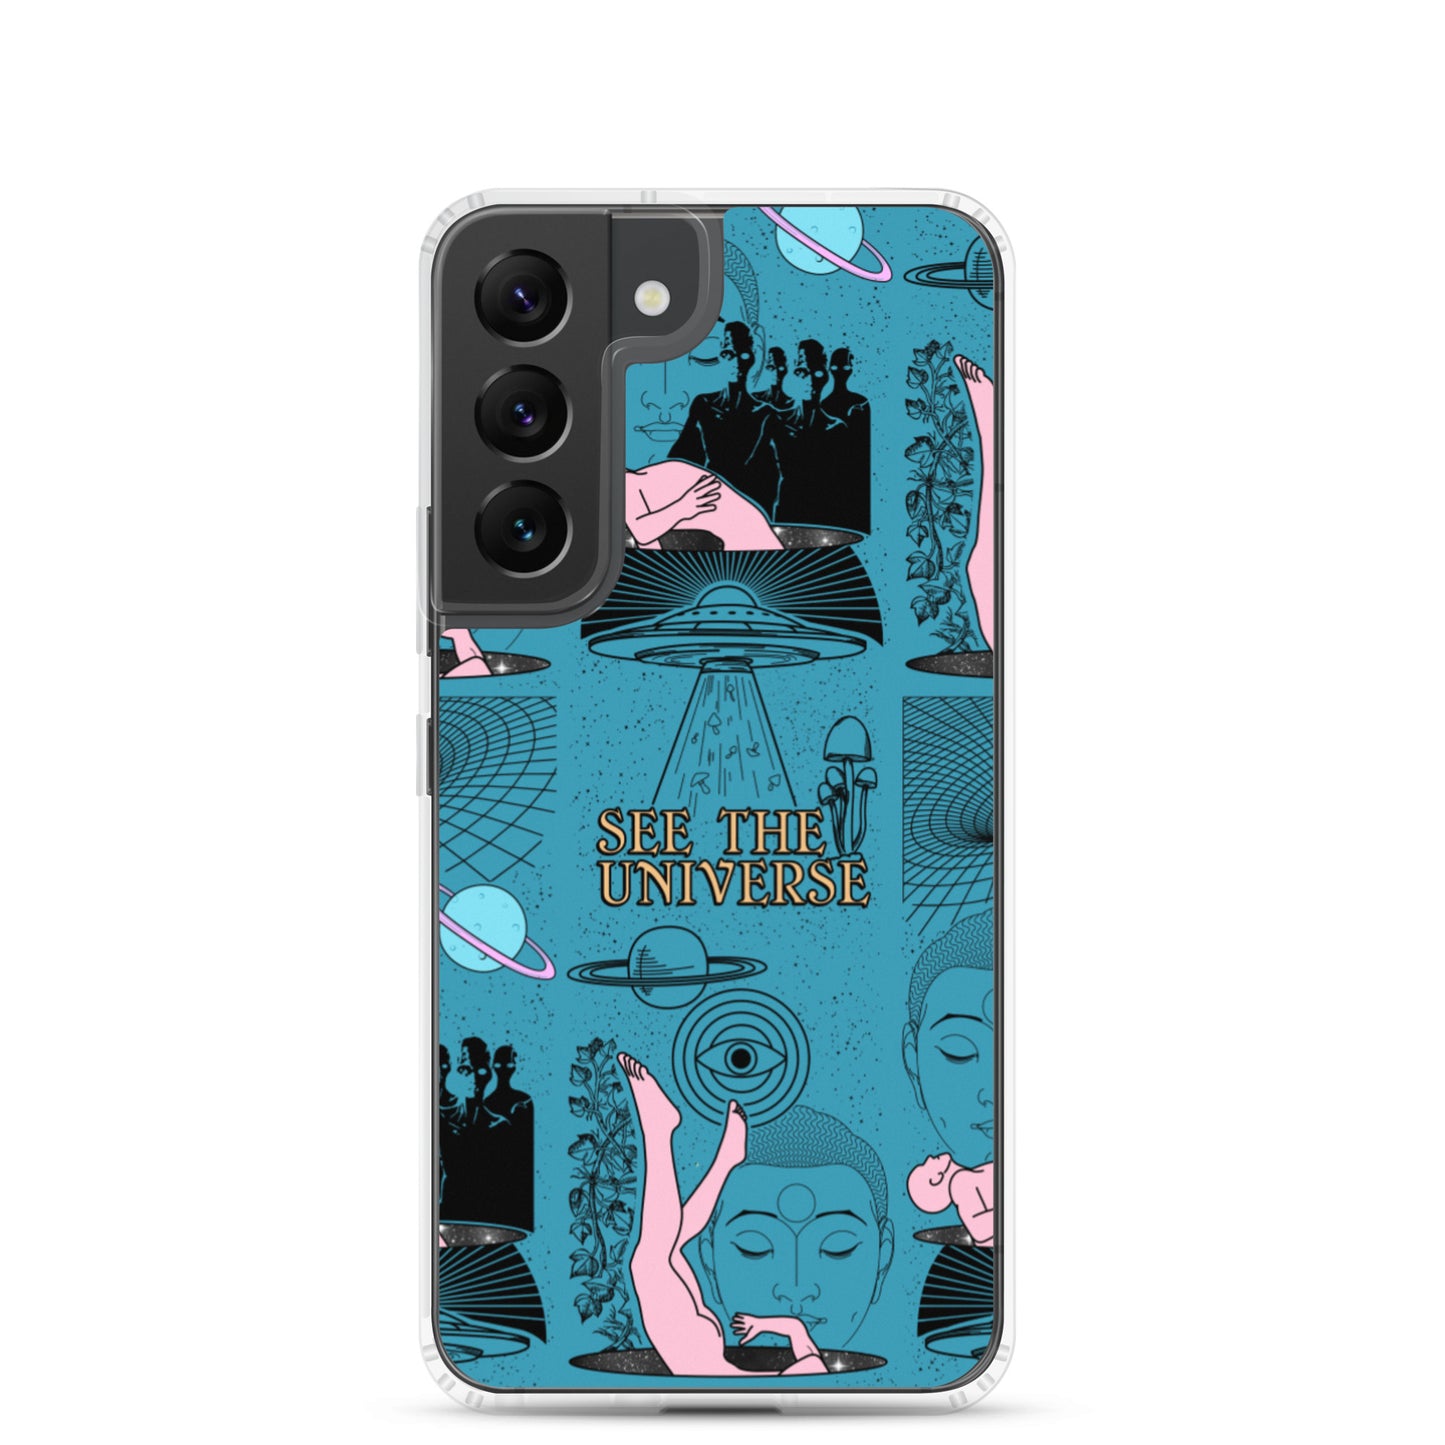 See The Universe Samsung Case